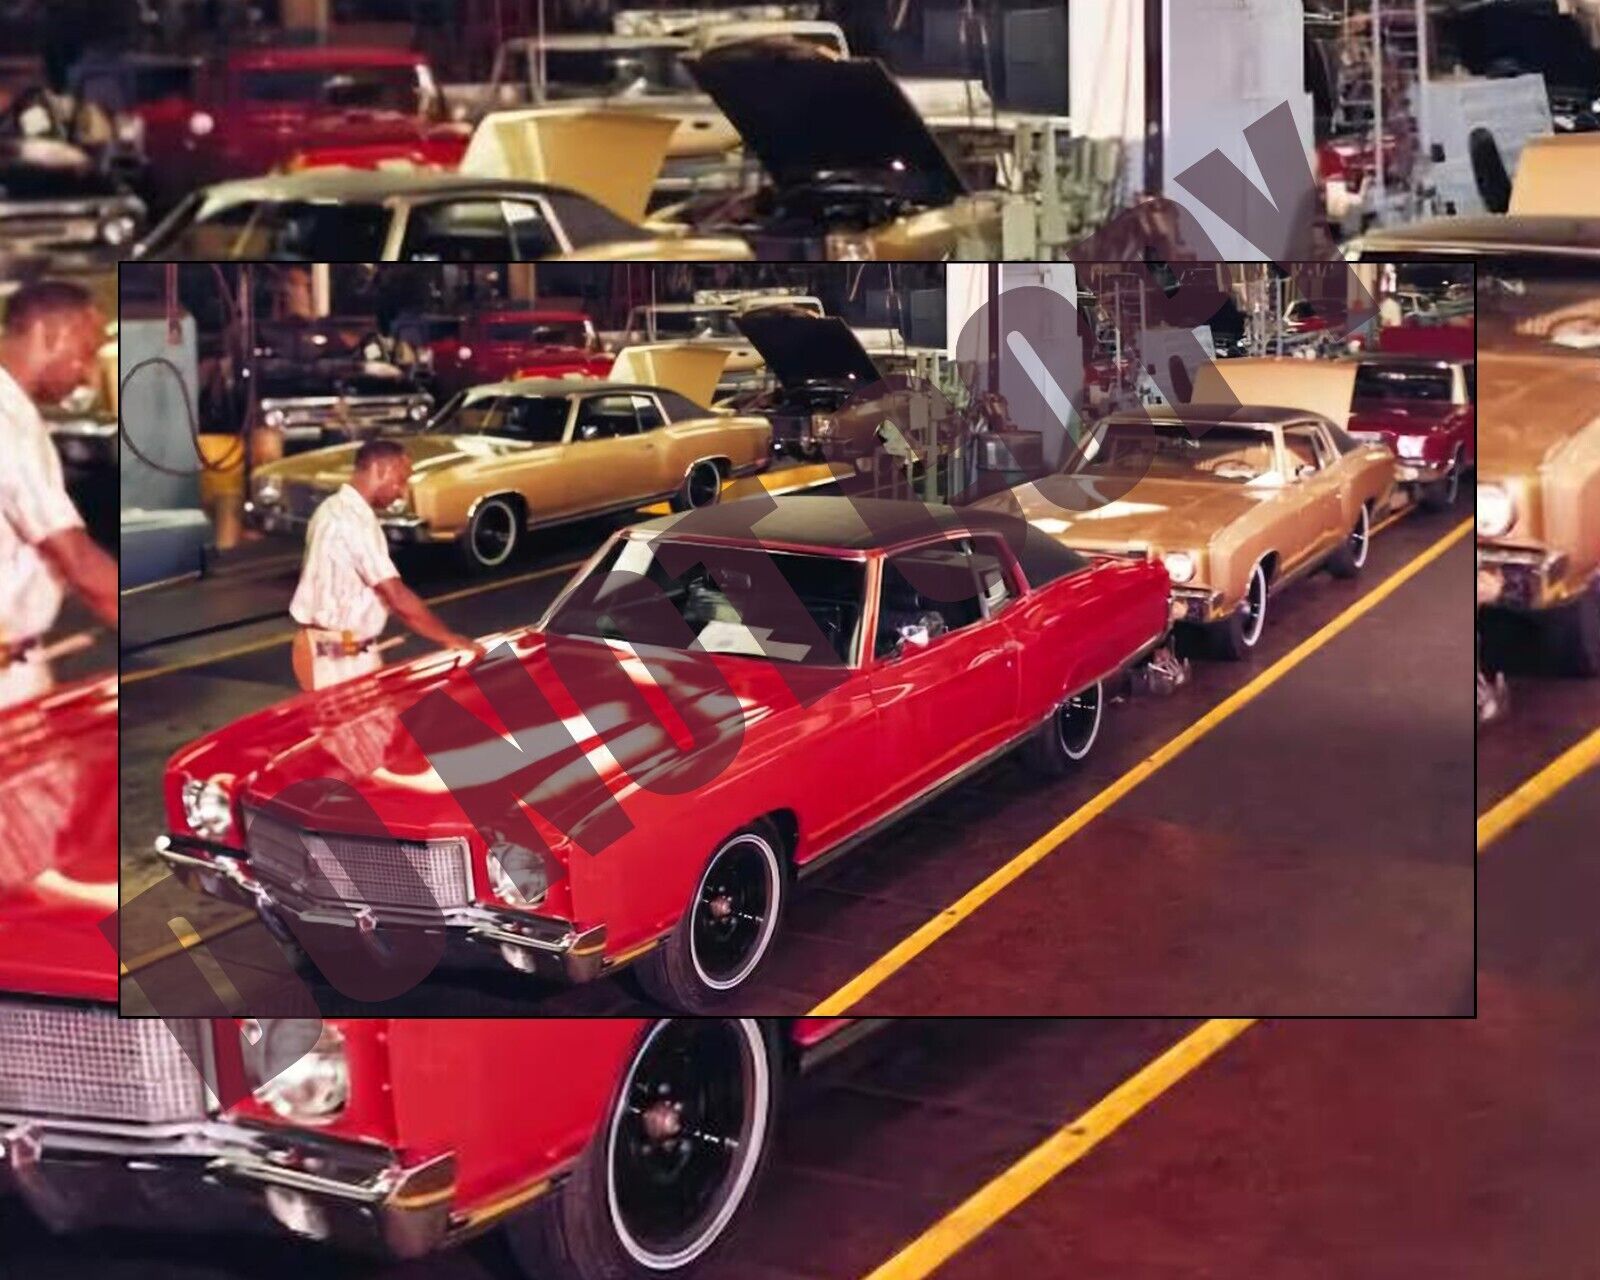 1972 Red Monte Carlo Rolling Off the Factory Assembly Line 8x10 Photo